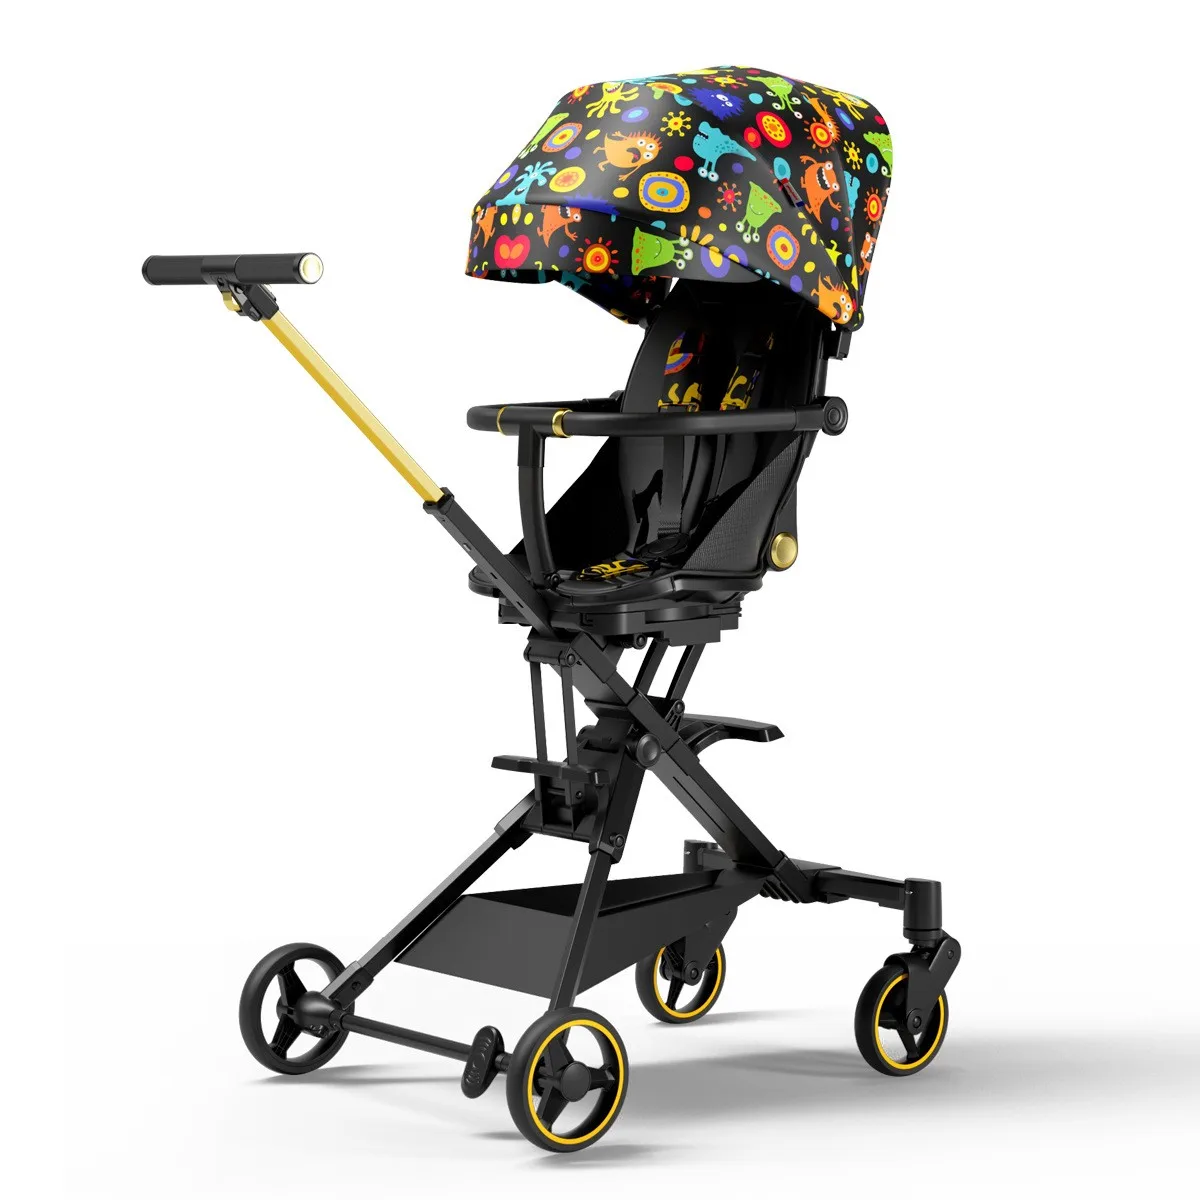 

Playkids Can Walk The Baby Stroller, Can Seat, Recline, High Landscape Stroller, Light Foldable Stroller Baby Car Seat Cover